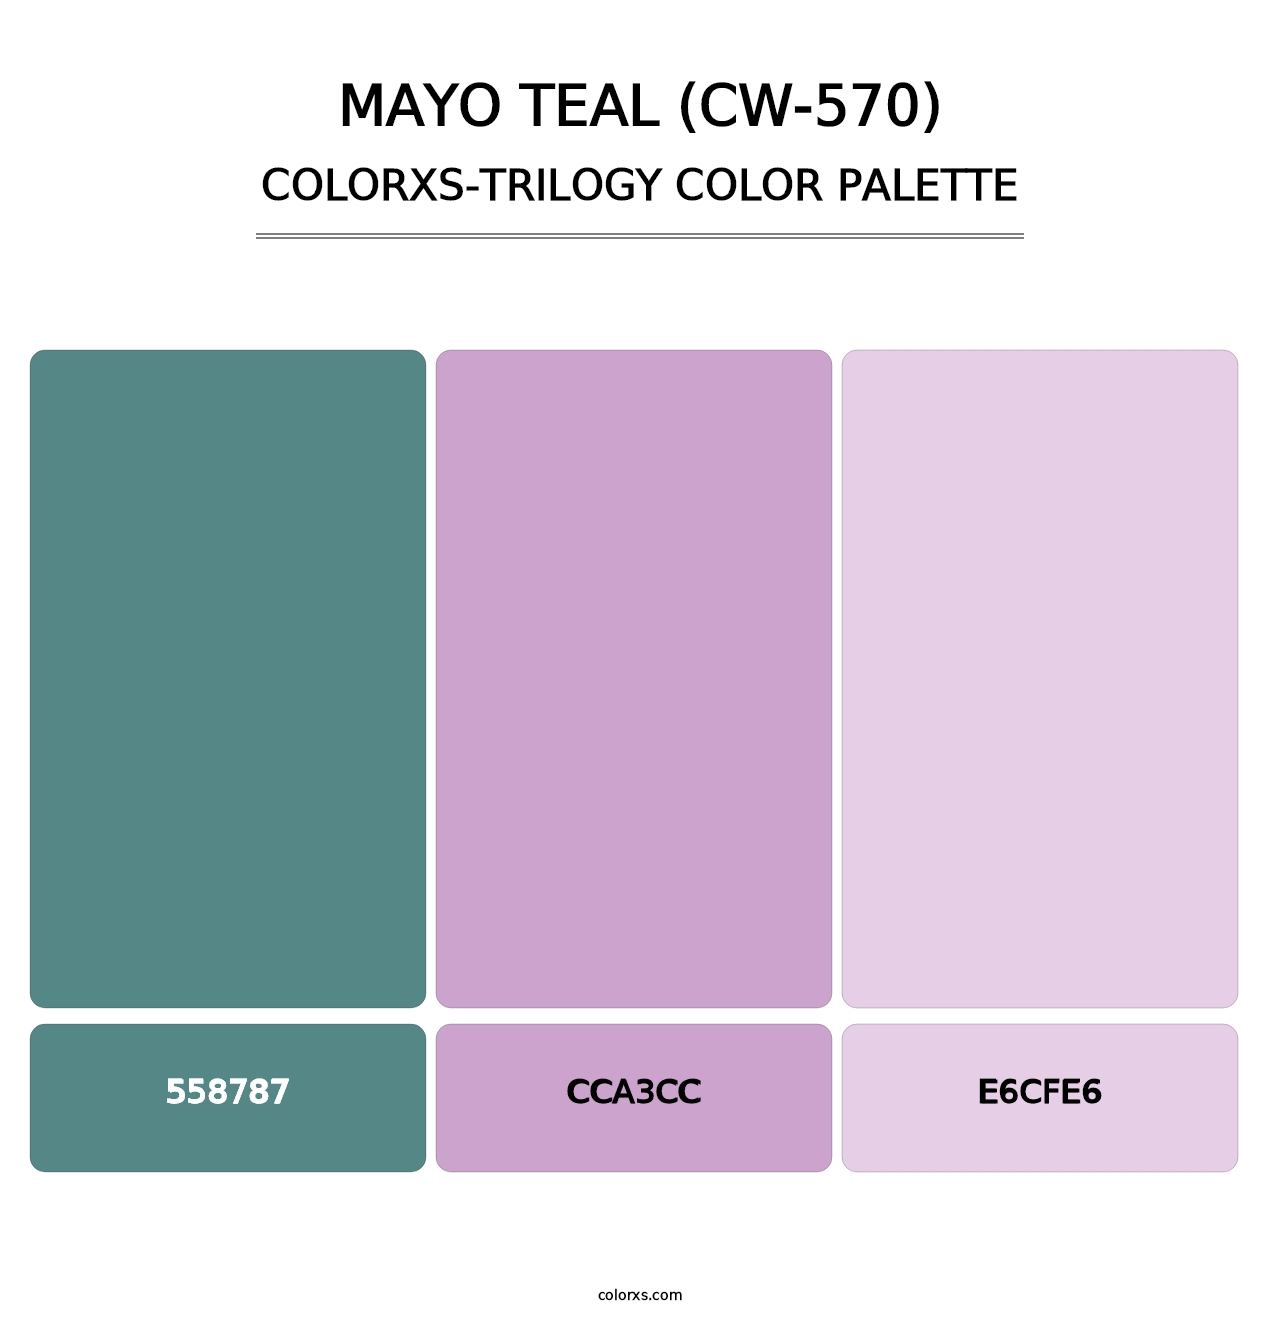 Mayo Teal (CW-570) - Colorxs Trilogy Palette